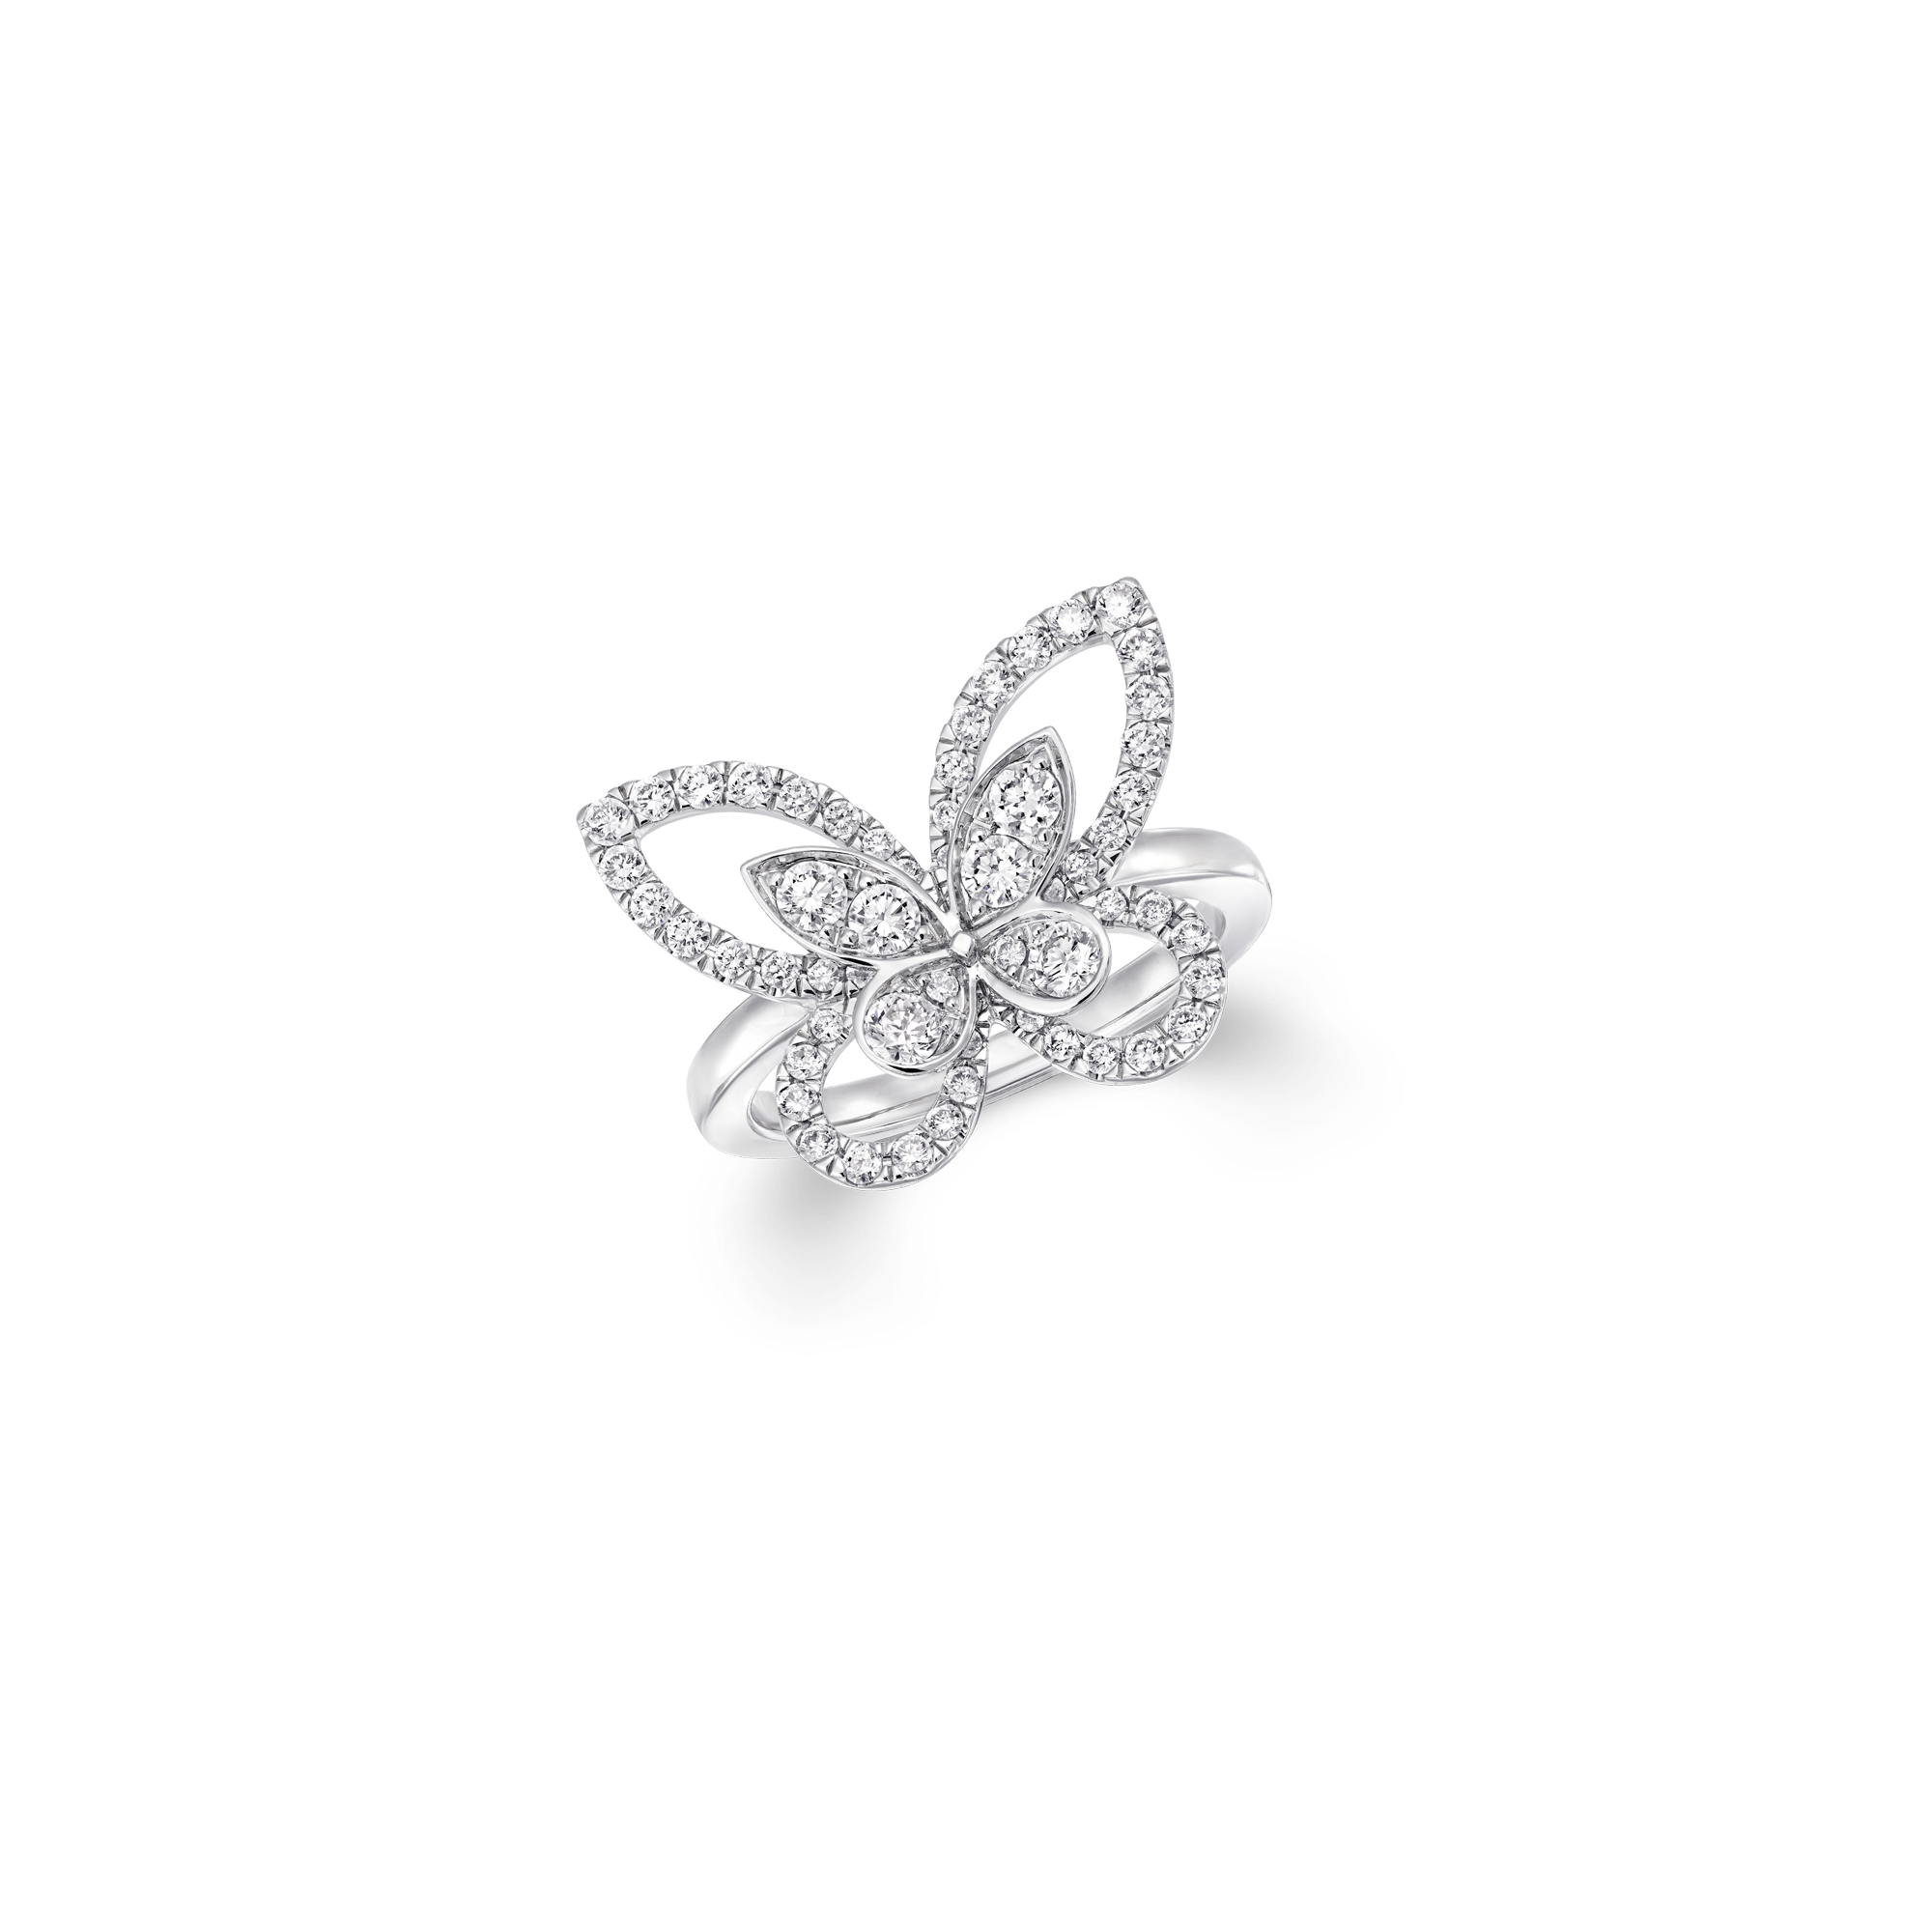 Butterfly Silhouette Diamond Ring